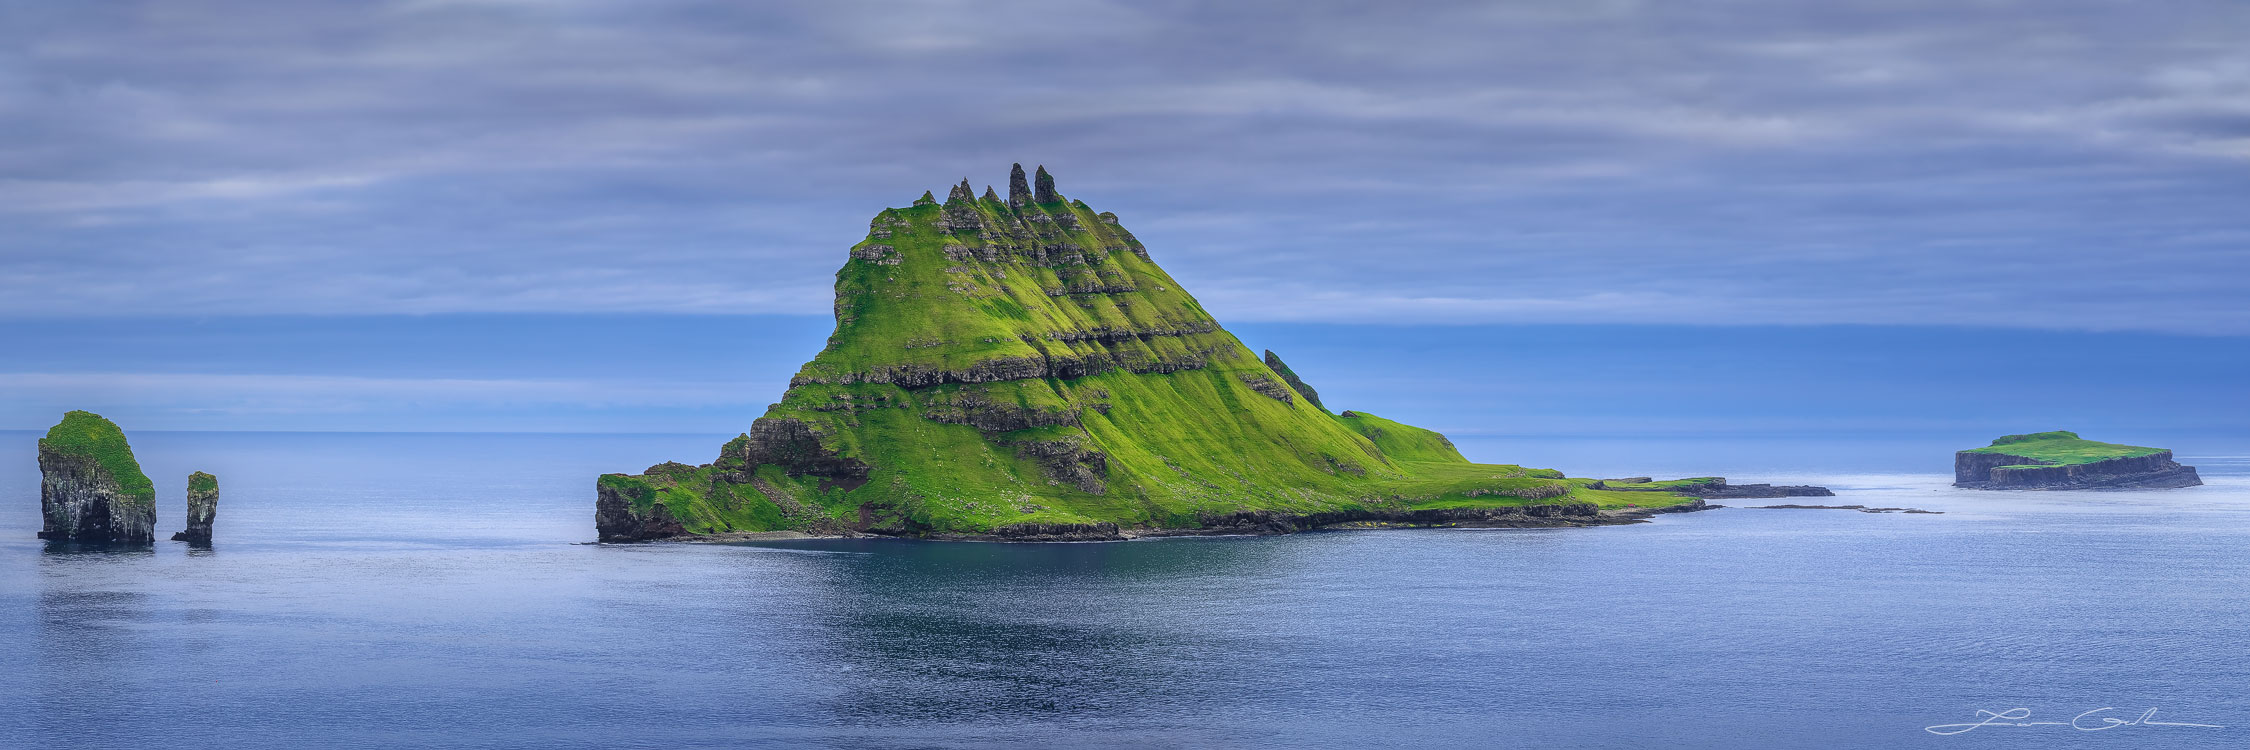 A lush green mountain island with sharp peaks in the middle of the ocean - Faroe Islands - Gintchin Fine Art